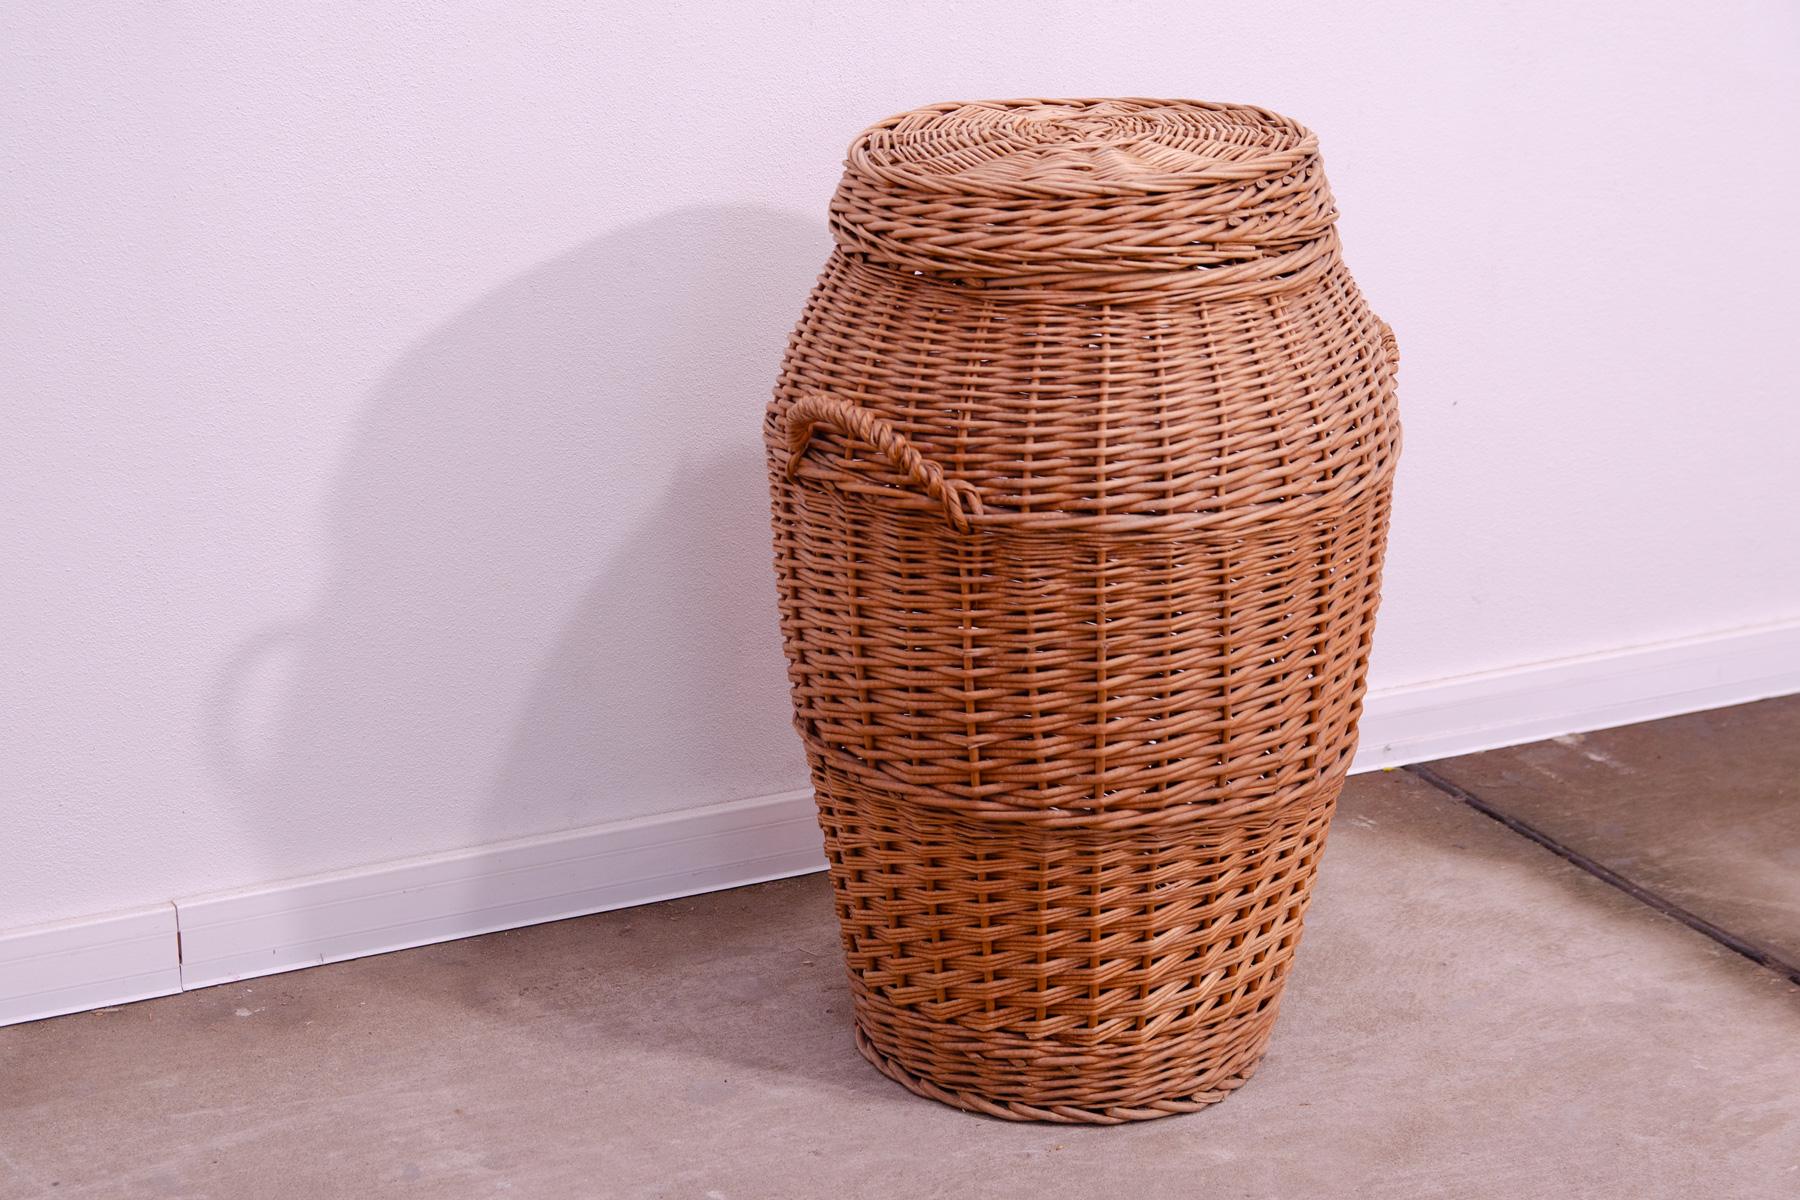 Vintage wicker laundry basket, made in the 70s in the former Czechoslovakia. In very good preserved condition.

Dimensions:

63 x 45 x 40cm (HxWxD)